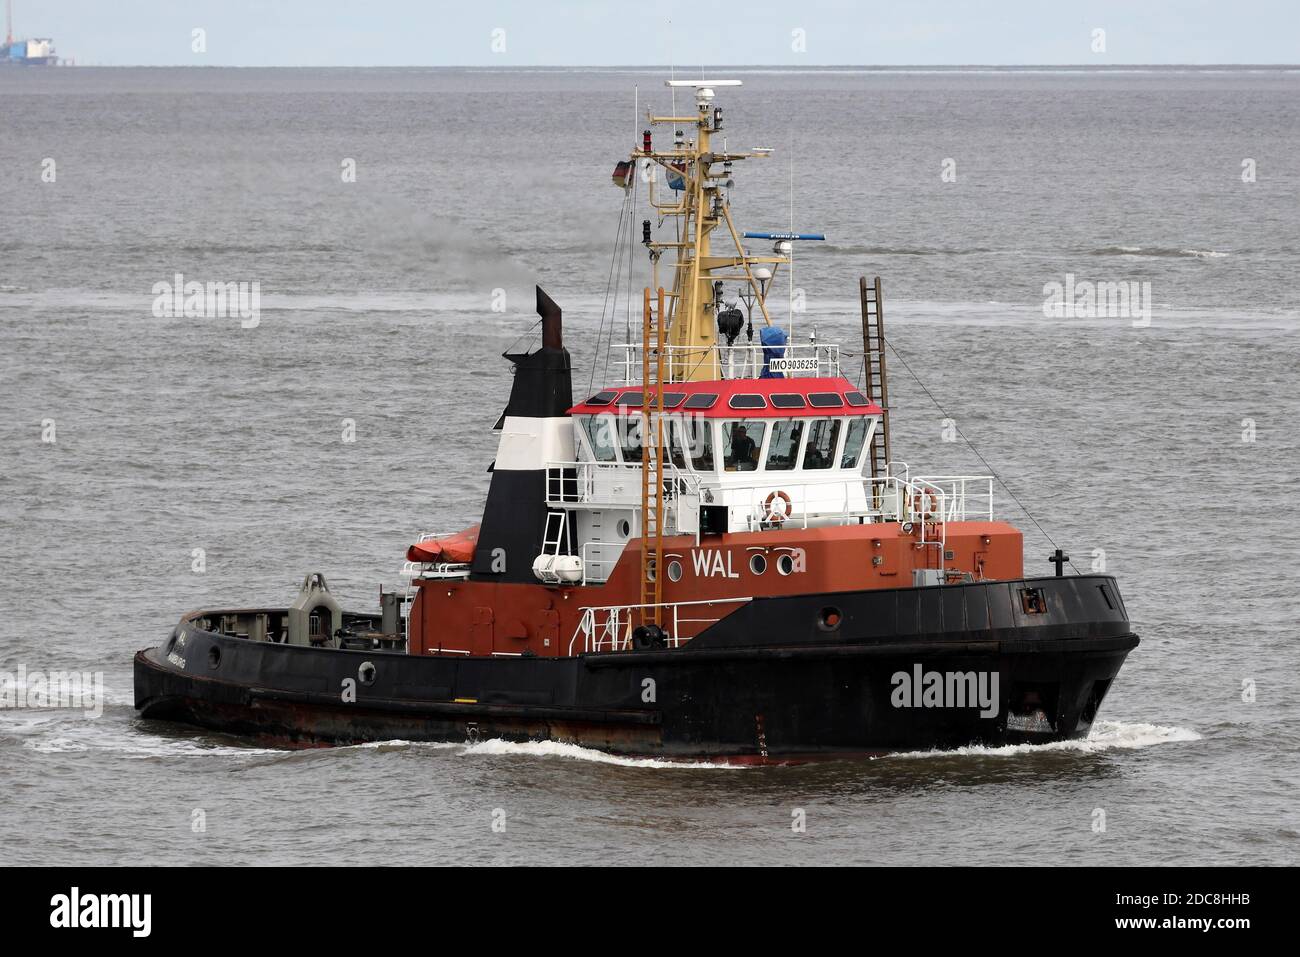 The harbor tug Wal will pass the port of Cuxhaven on August 25, 2020 and continue towards Brunsbüttel. Stock Photo